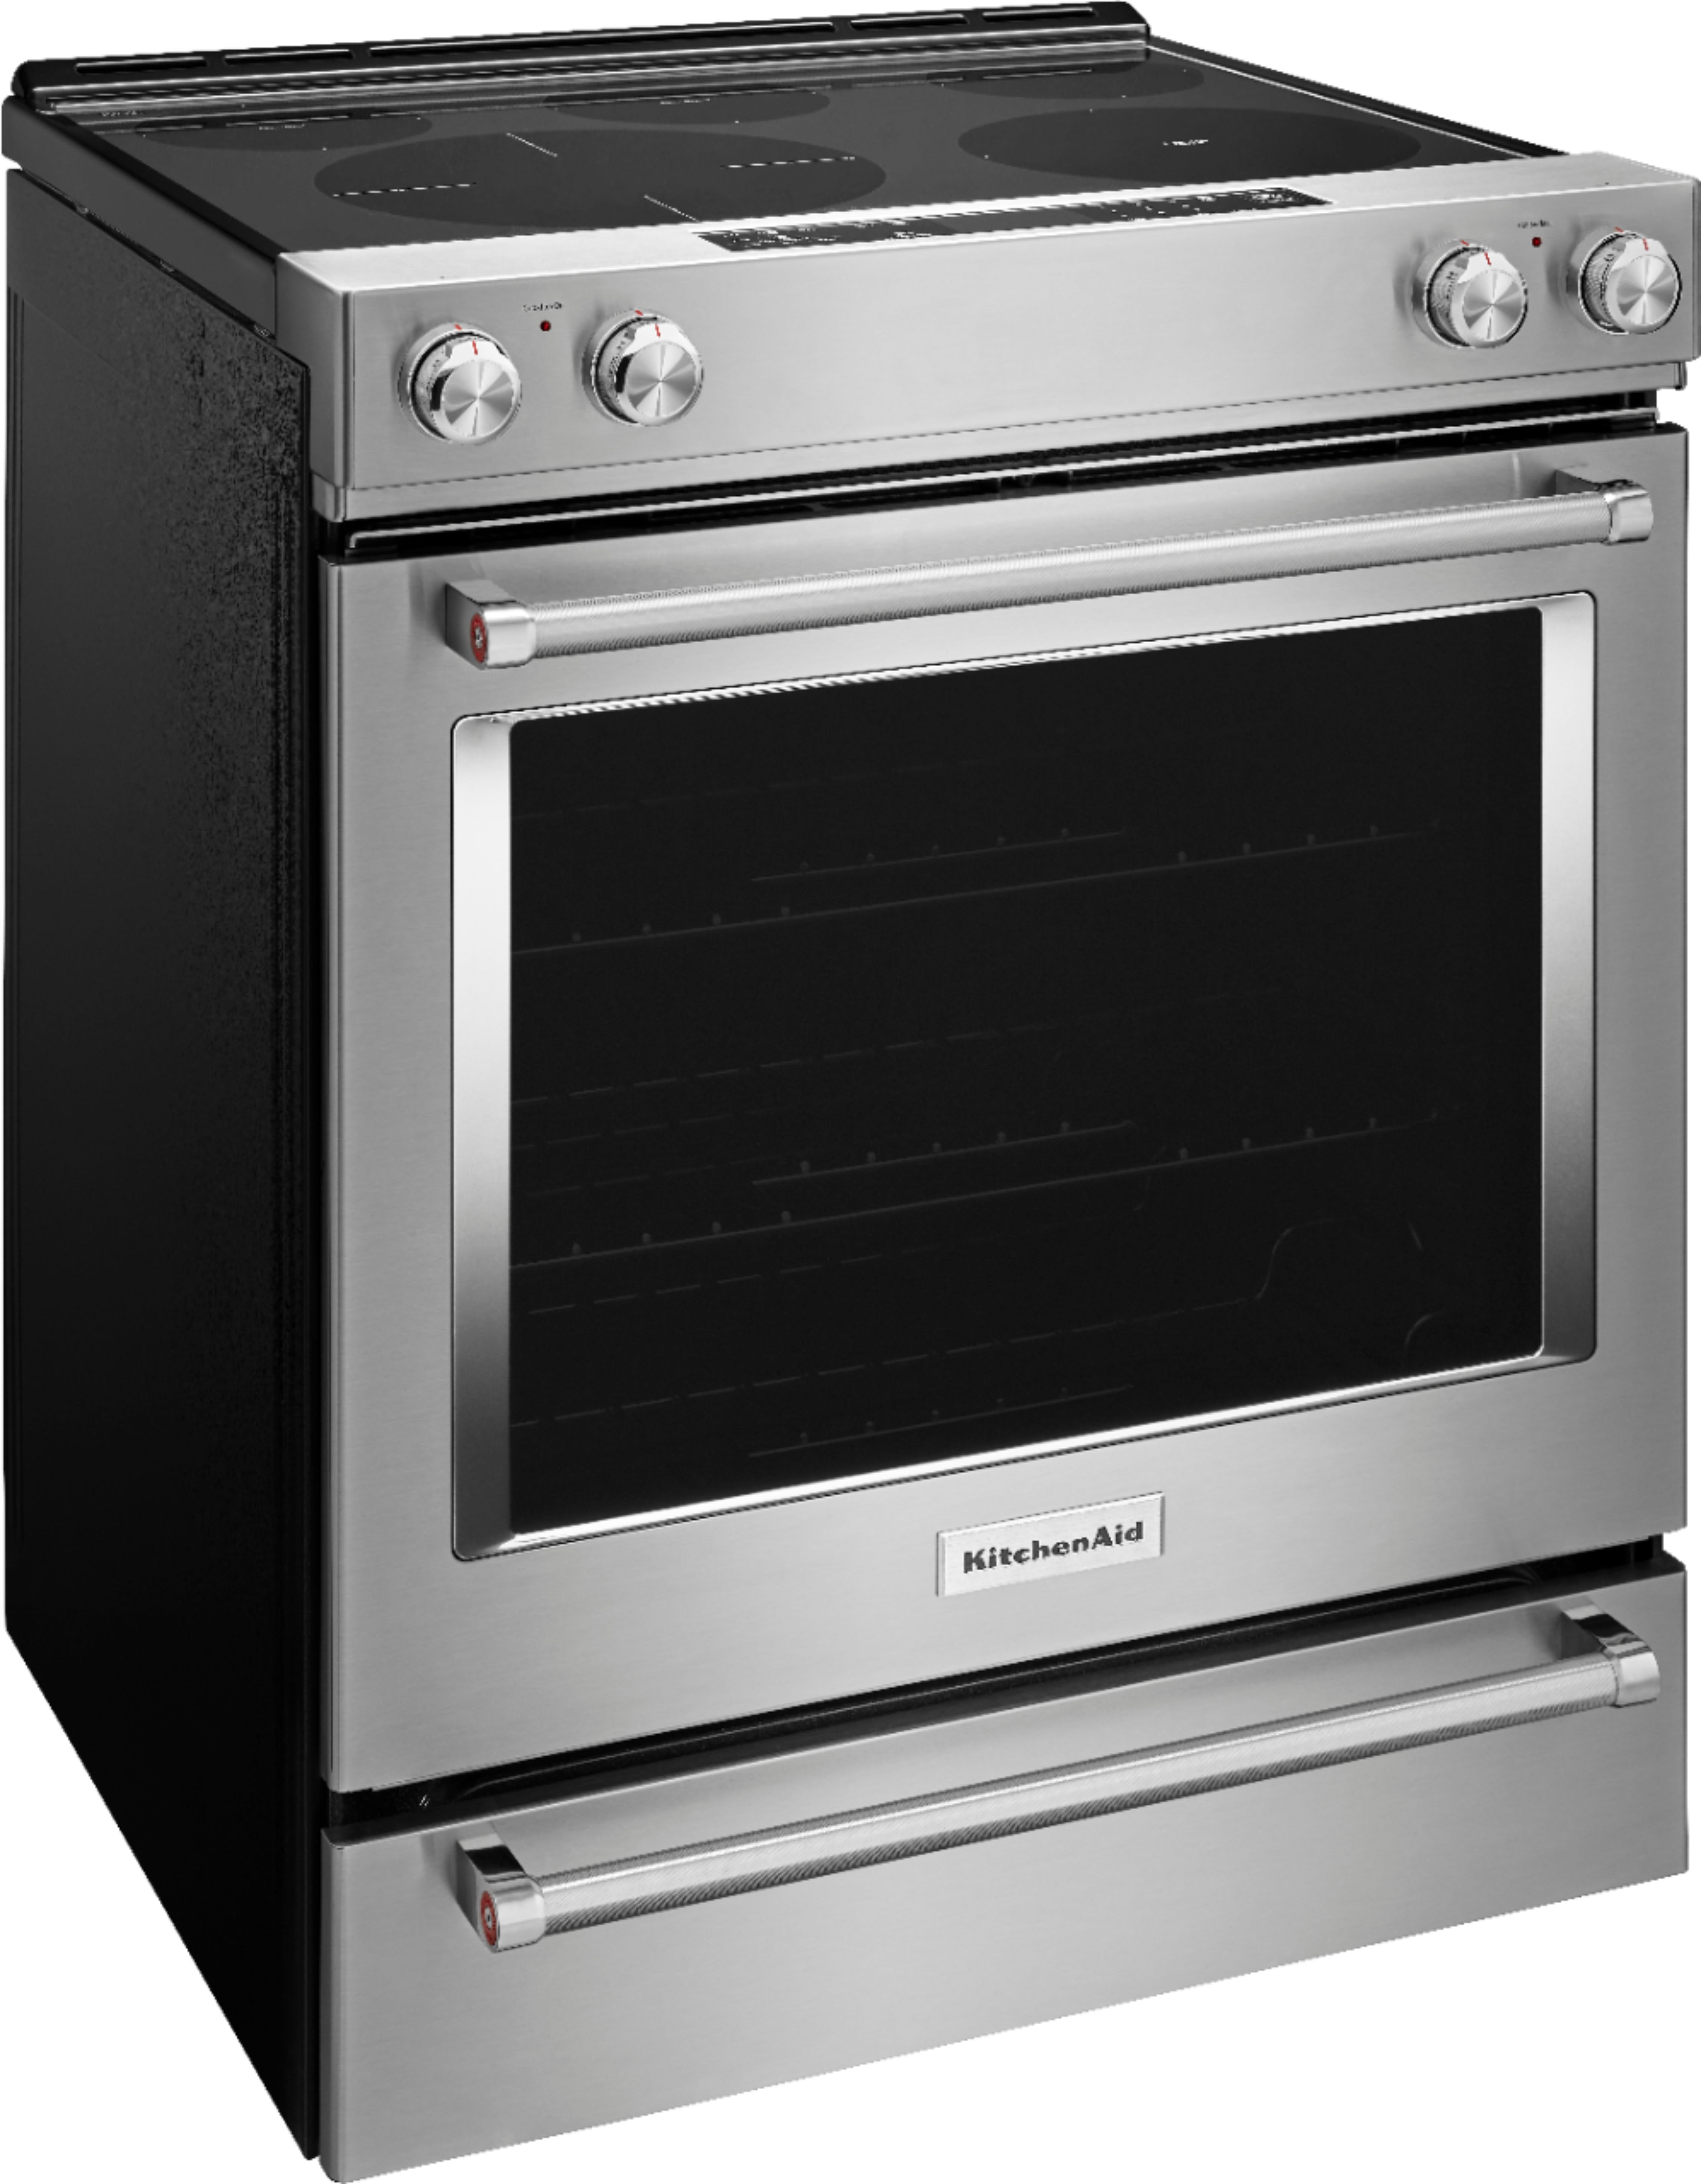 Angle View: KitchenAid - 6.4 Cu. Ft. Self-Cleaning Slide-In Electric Convection Range - Stainless steel